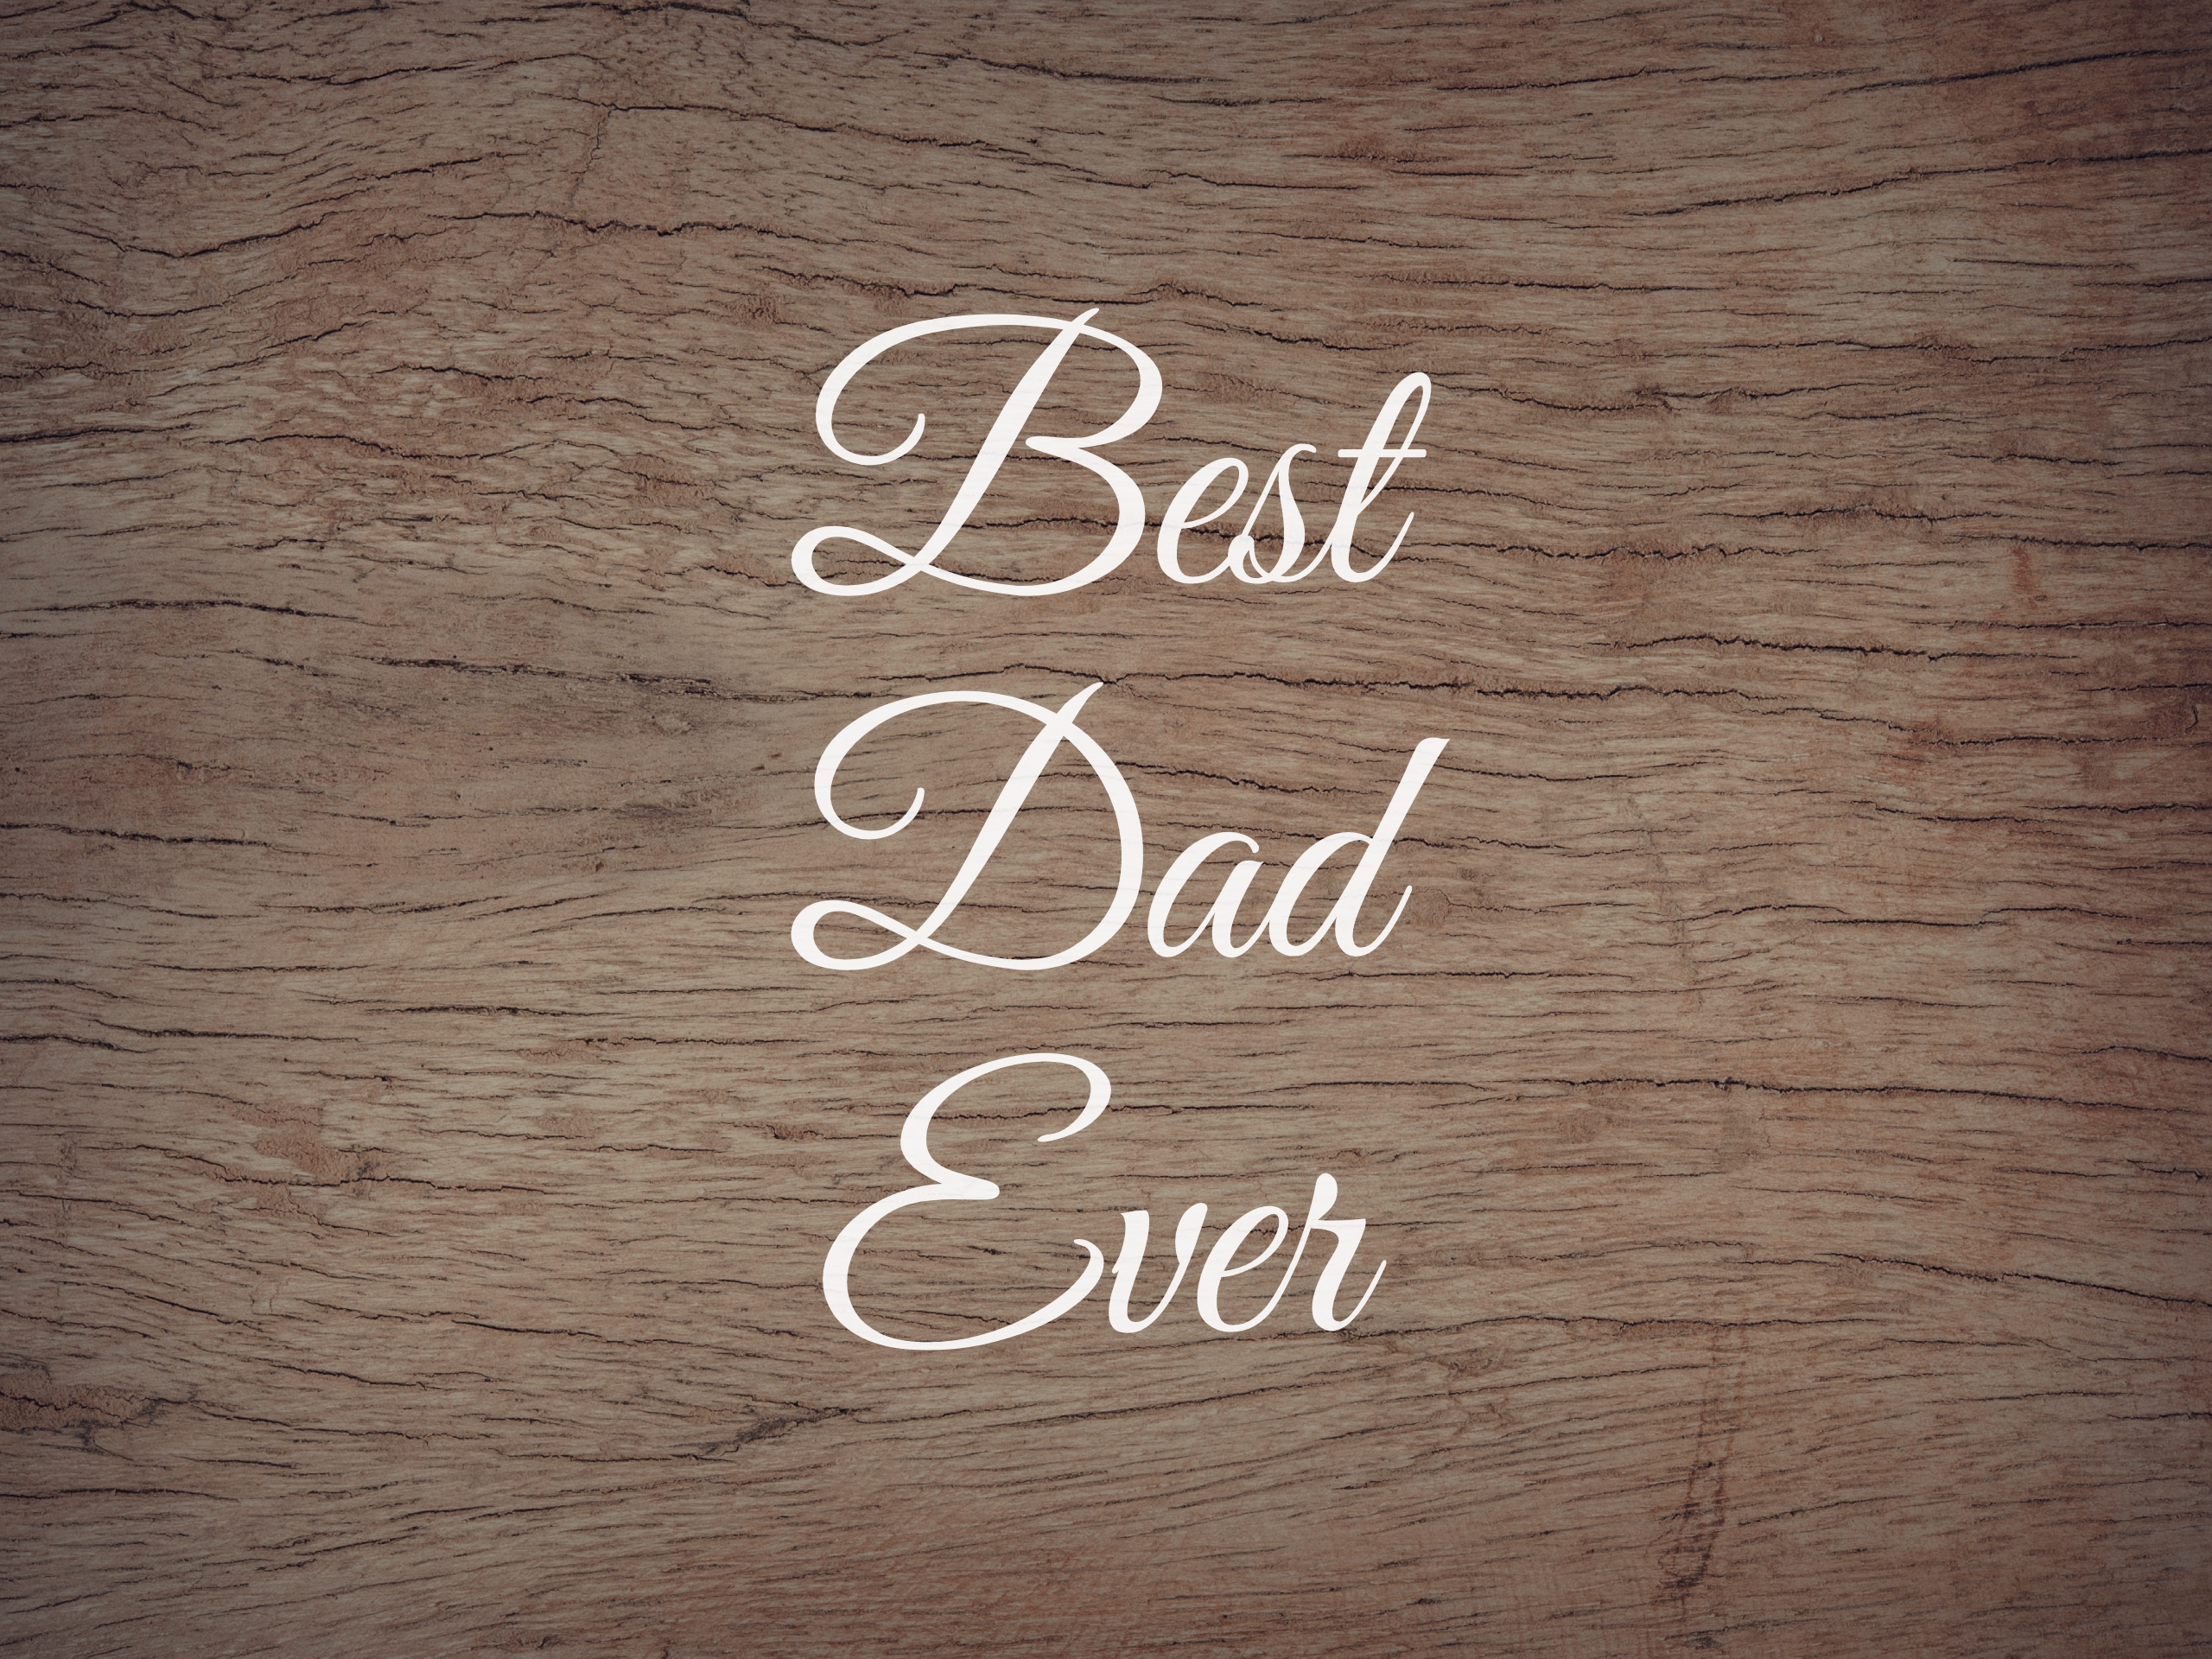 Best Dad Ever Decal - Holiday Father/Dad/Dada/Daddy Vinyl Decals for Home, Gifts, Businesses and More!